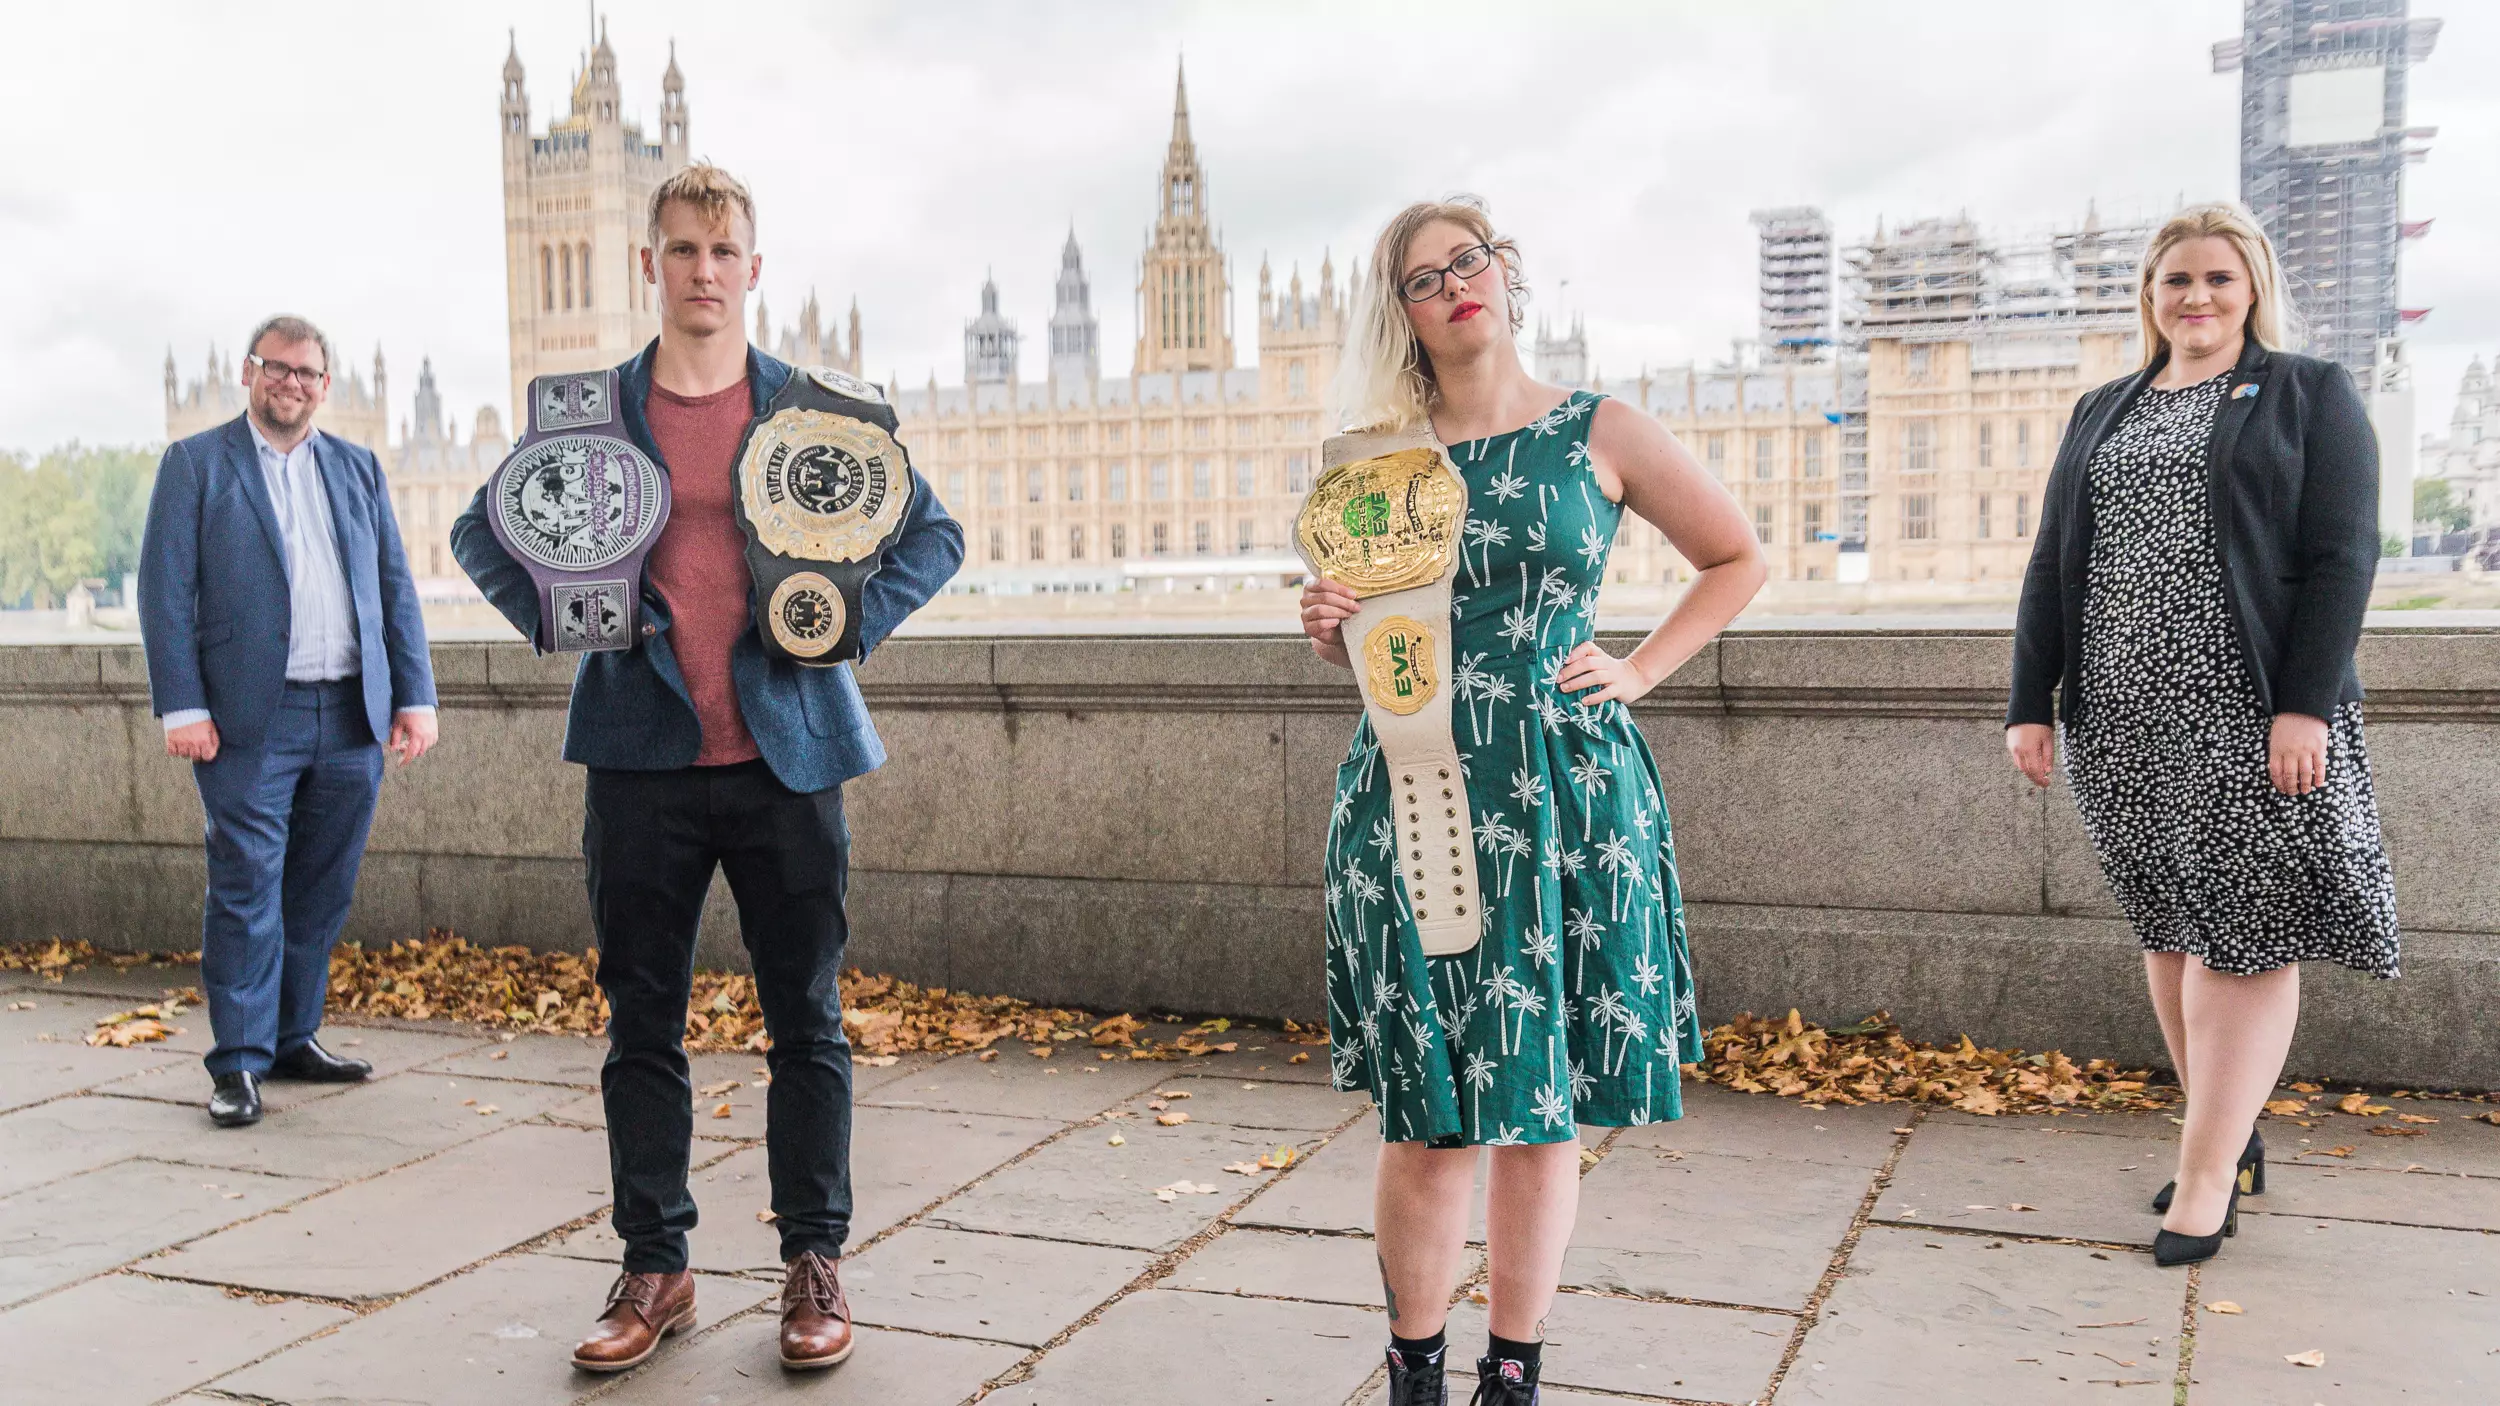 UK Government Launch Inquiry Into Professional Wrestling Following Speaking Out Movement